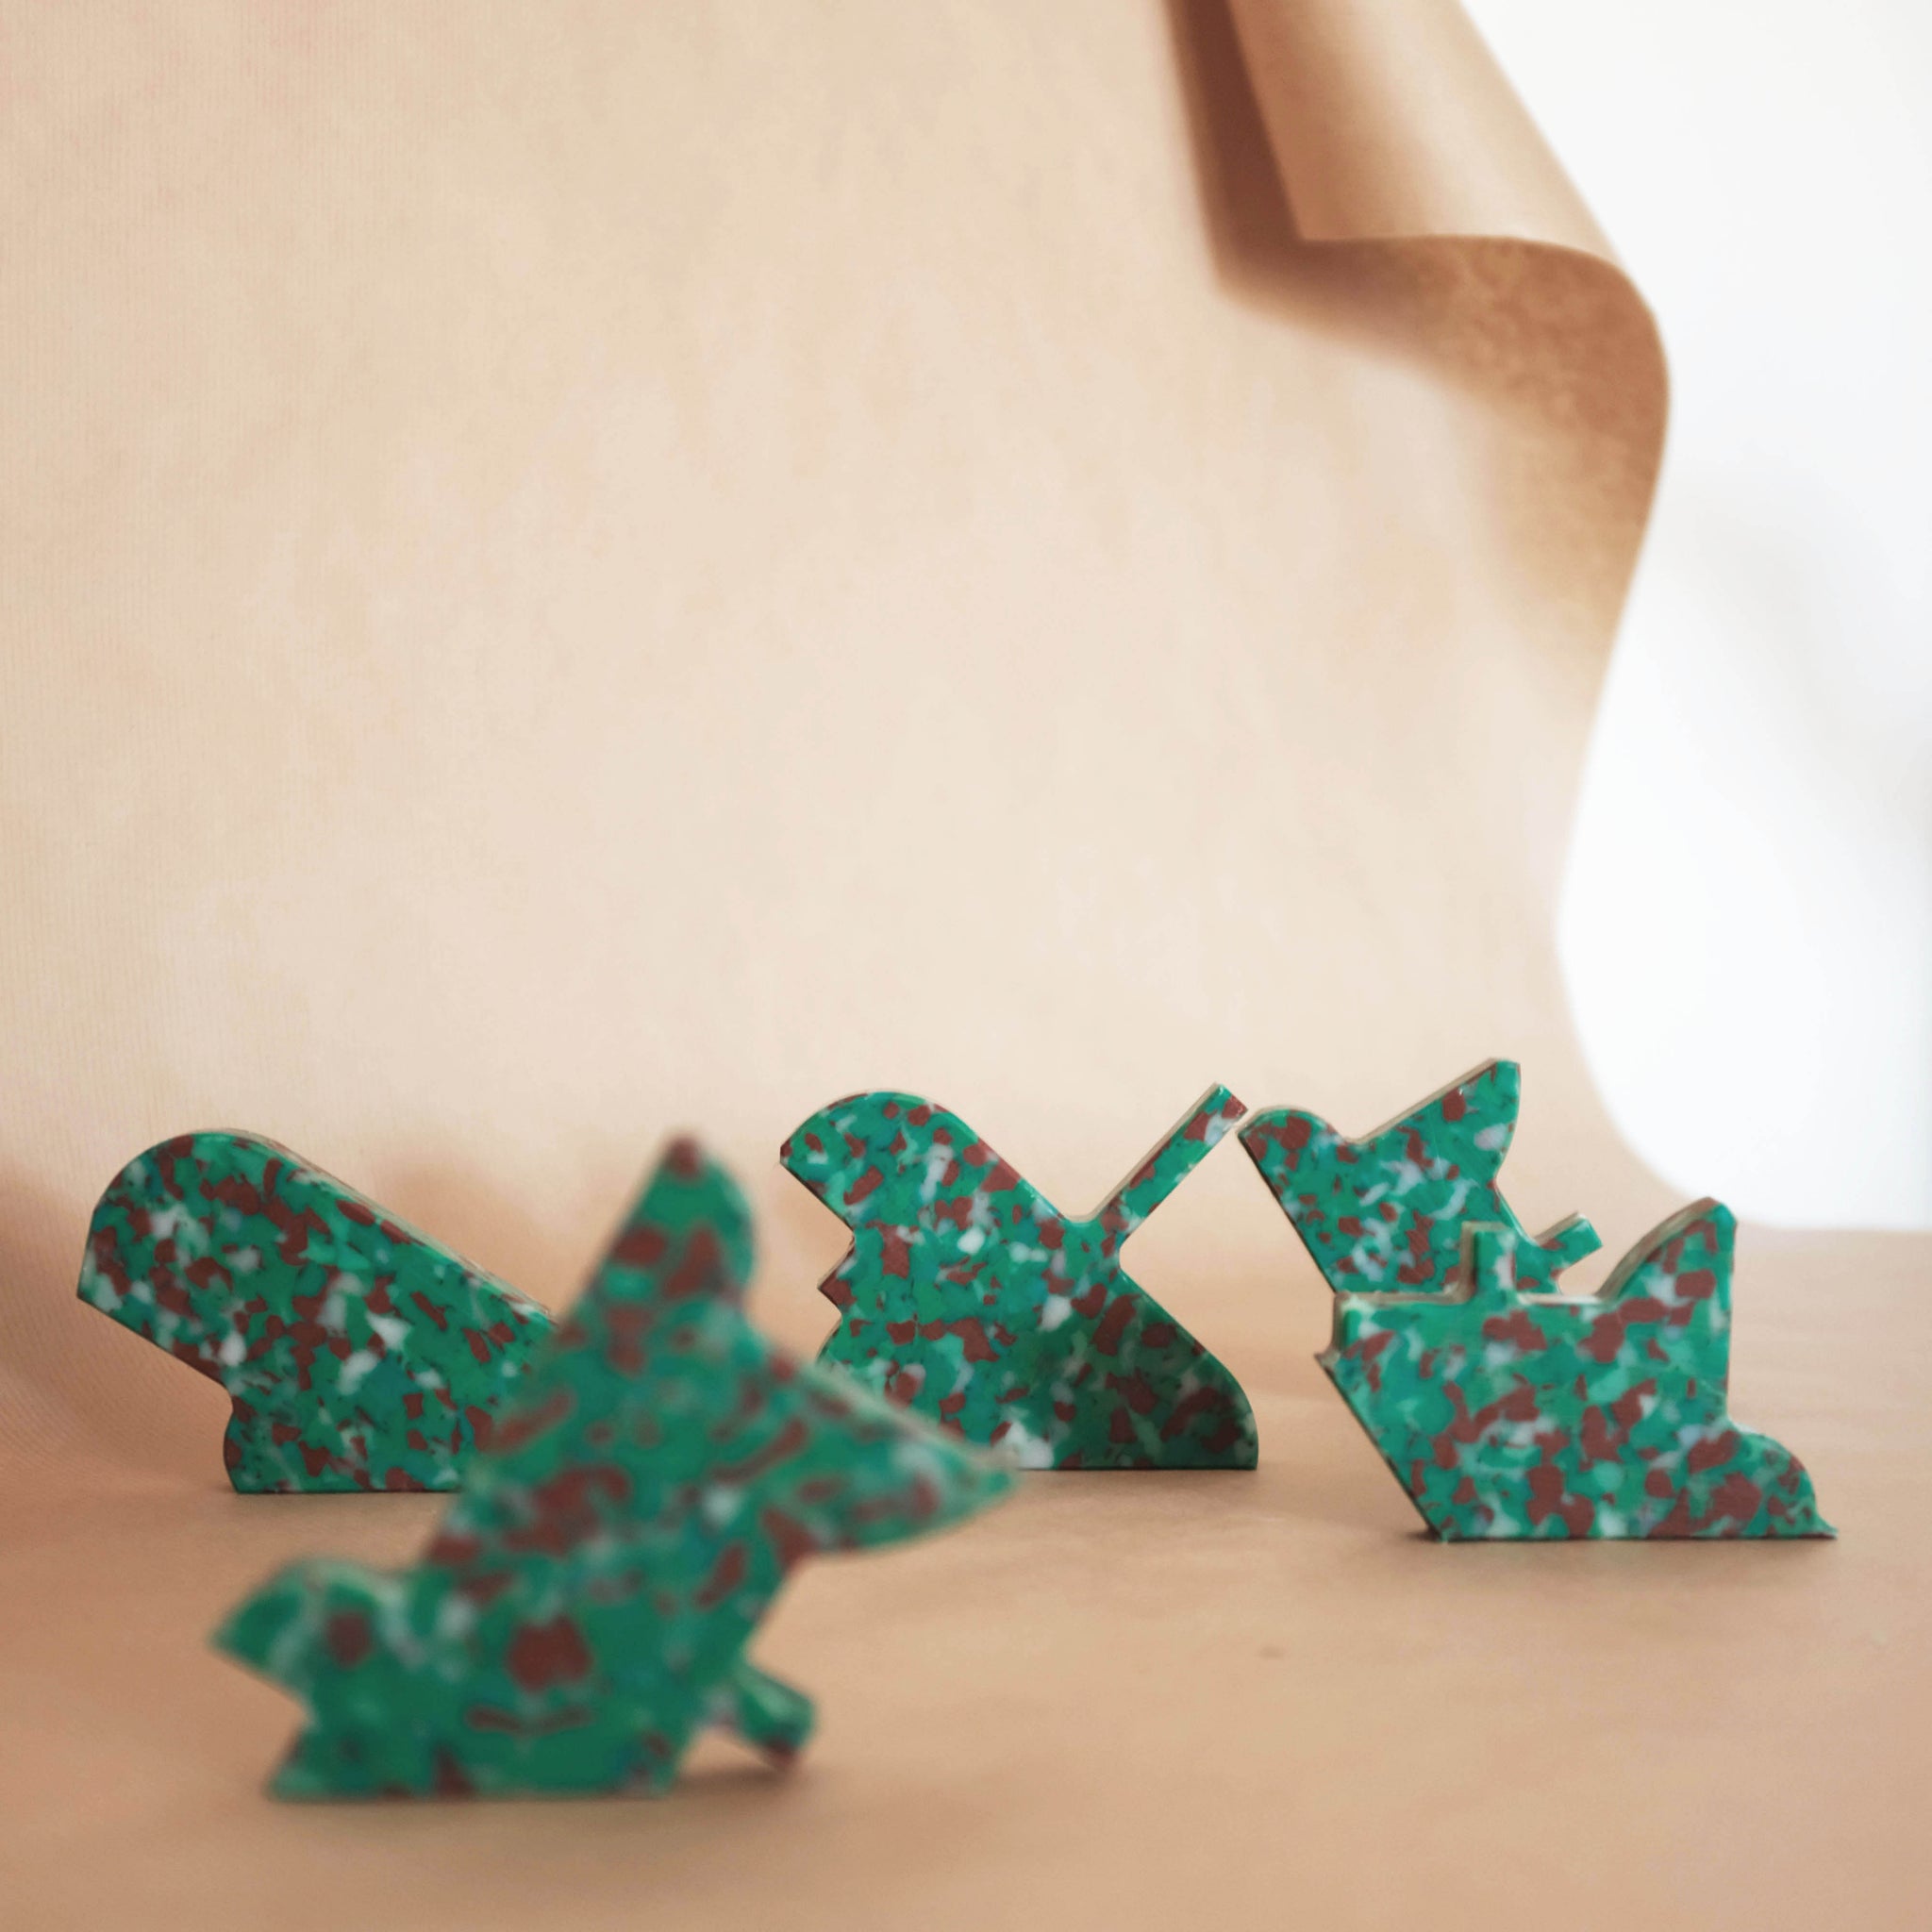 GREEN WALL HOOKS FROM RANDOM PRODUCTION CUT OFFS BY THE MINIMONO PROJECT - BRAND FOR ECO FRIENDLY - PLAYFUL - MULTI FUNCTIONAL - SUSTAINABLE - HIGH QUALITY - DESIGN FURNITURE FROM RECYCLED PLASTIC FOR BOTH ADULT AND CHILDREN MADE IN BERLIN GERMANY